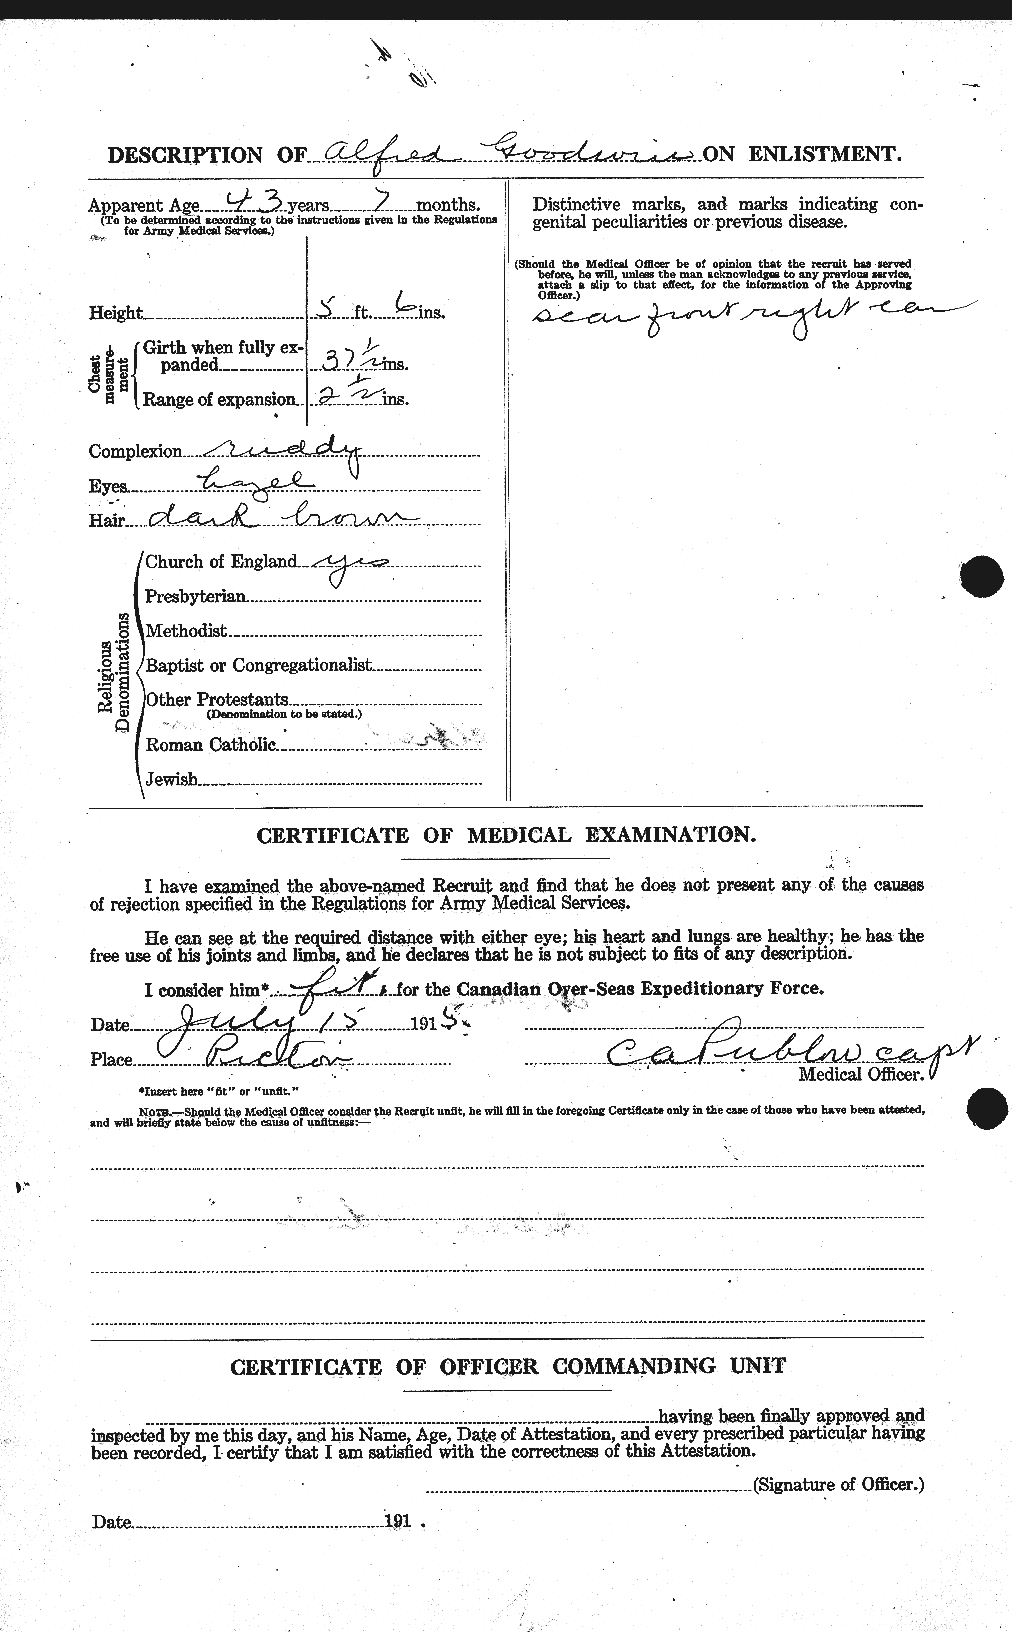 Personnel Records of the First World War - CEF 357924b